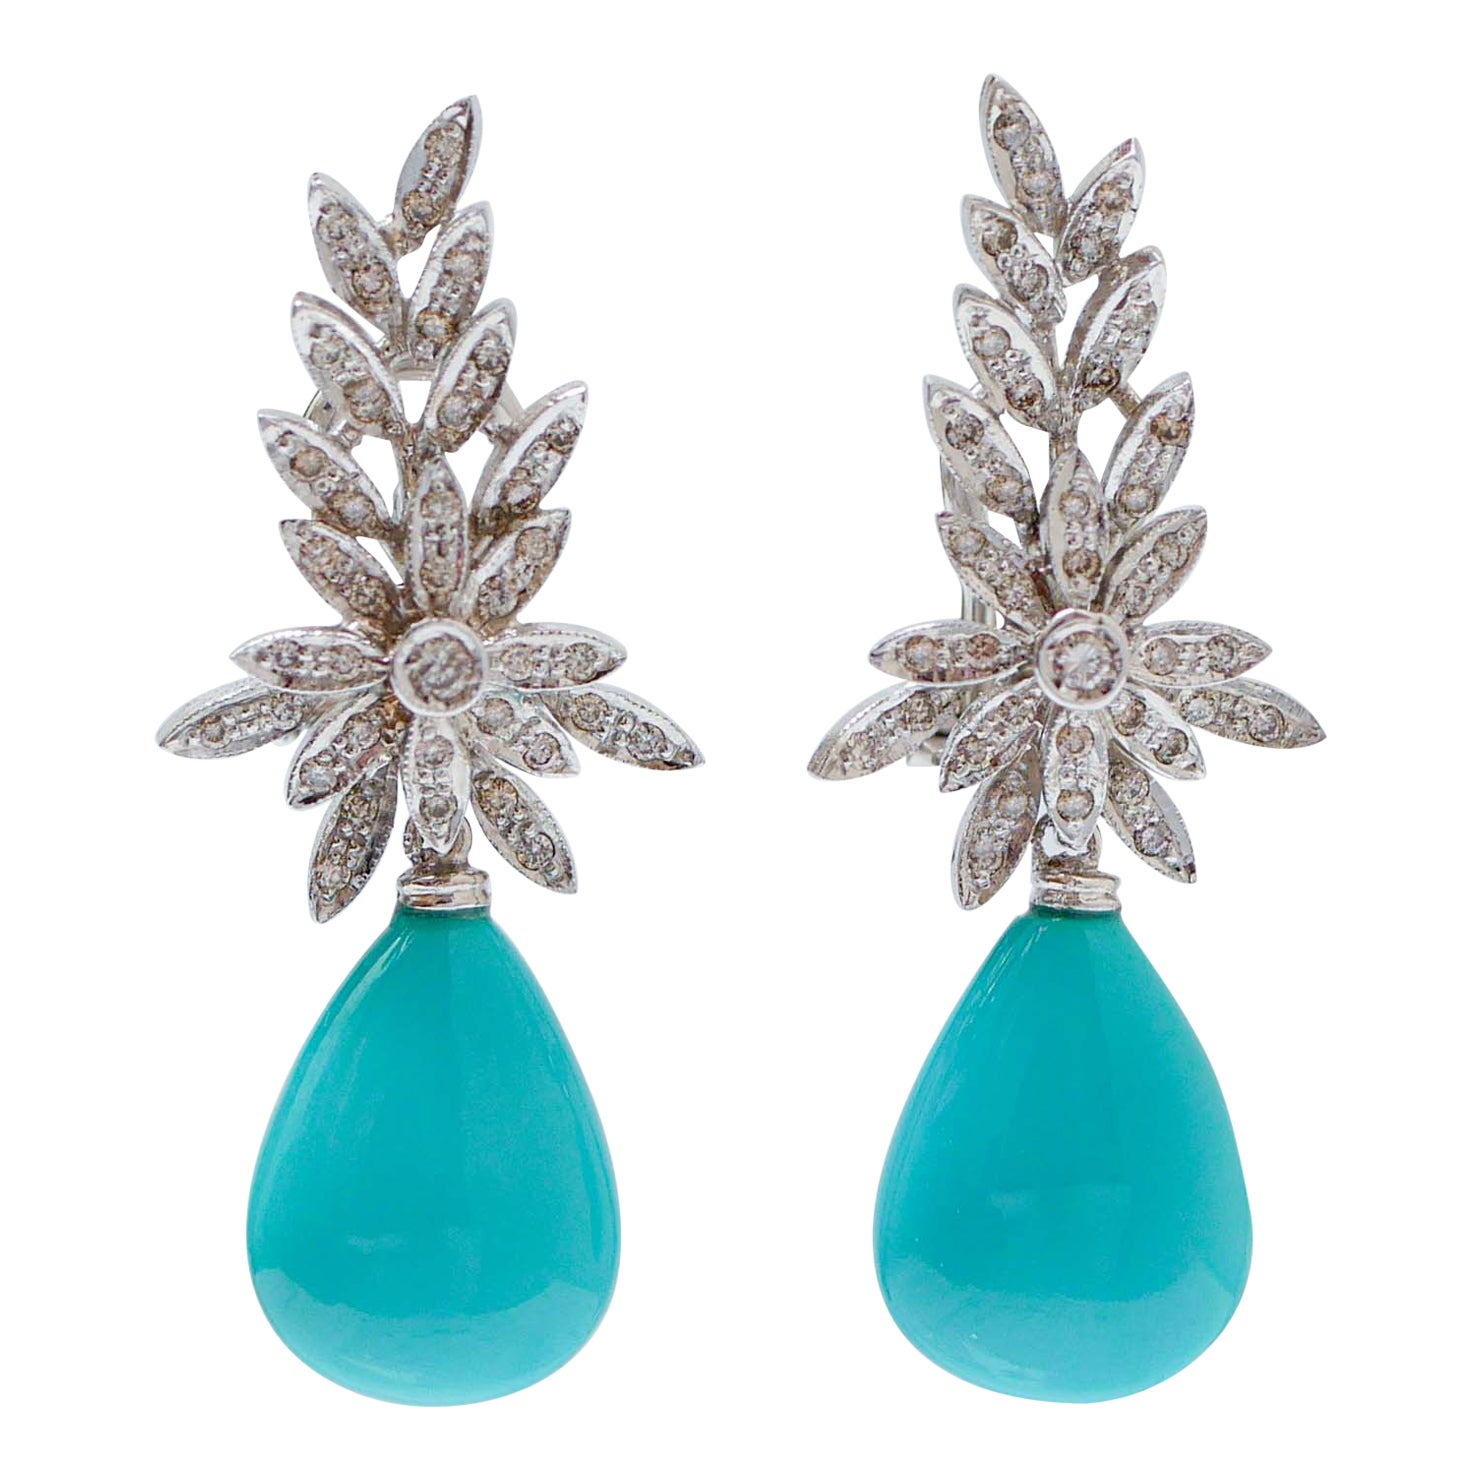 Turquoise, Diamonds, Platinum and 14 Kt White Gold Earrings. For Sale